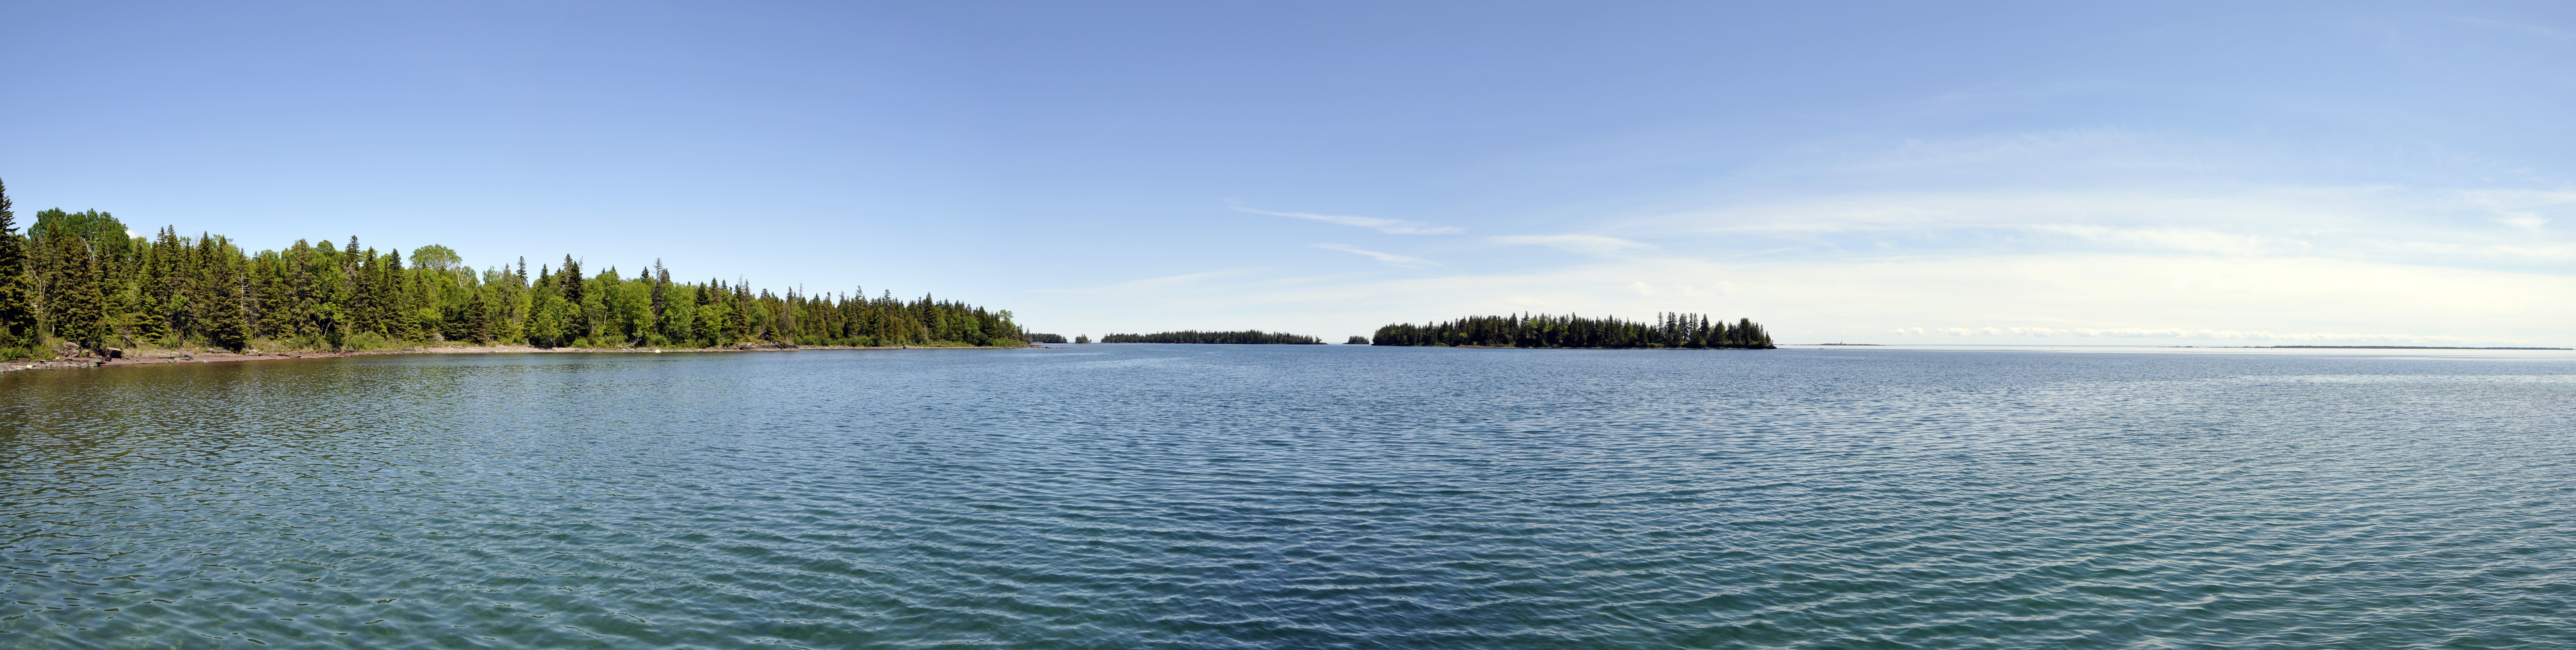 View of the blue waters of Malone Bay from the shoreline.